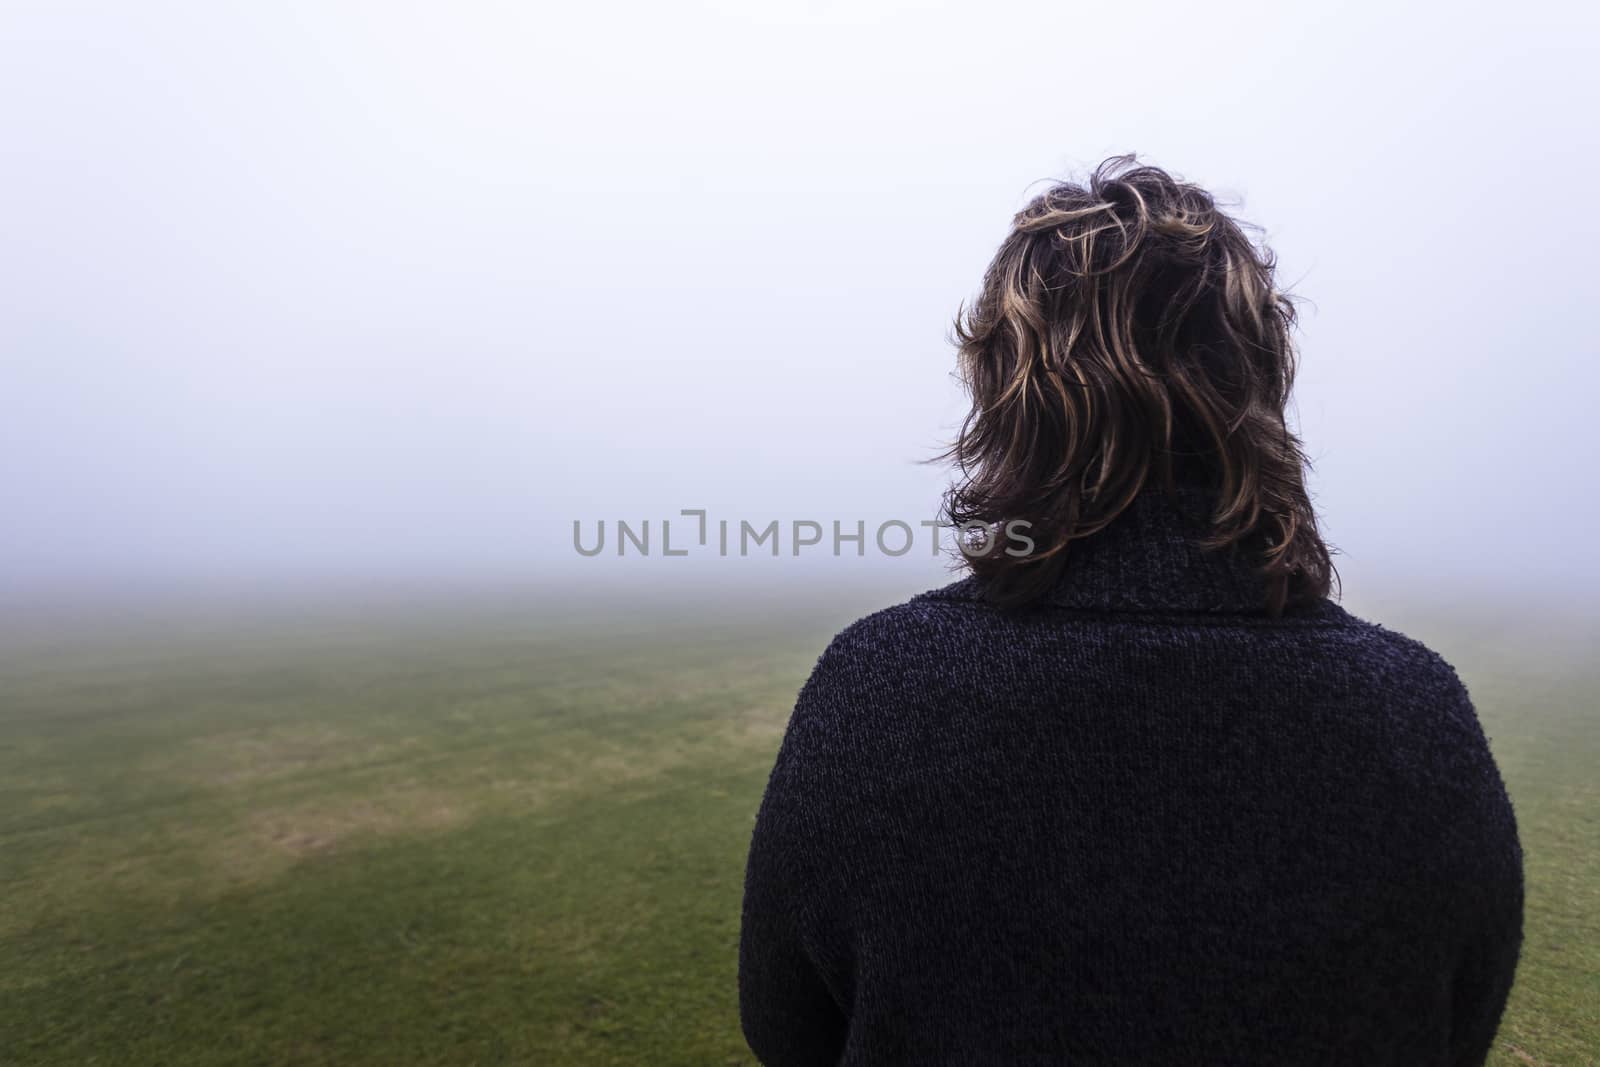 Woman Unidentified looks into the season mist over the field pending future days.